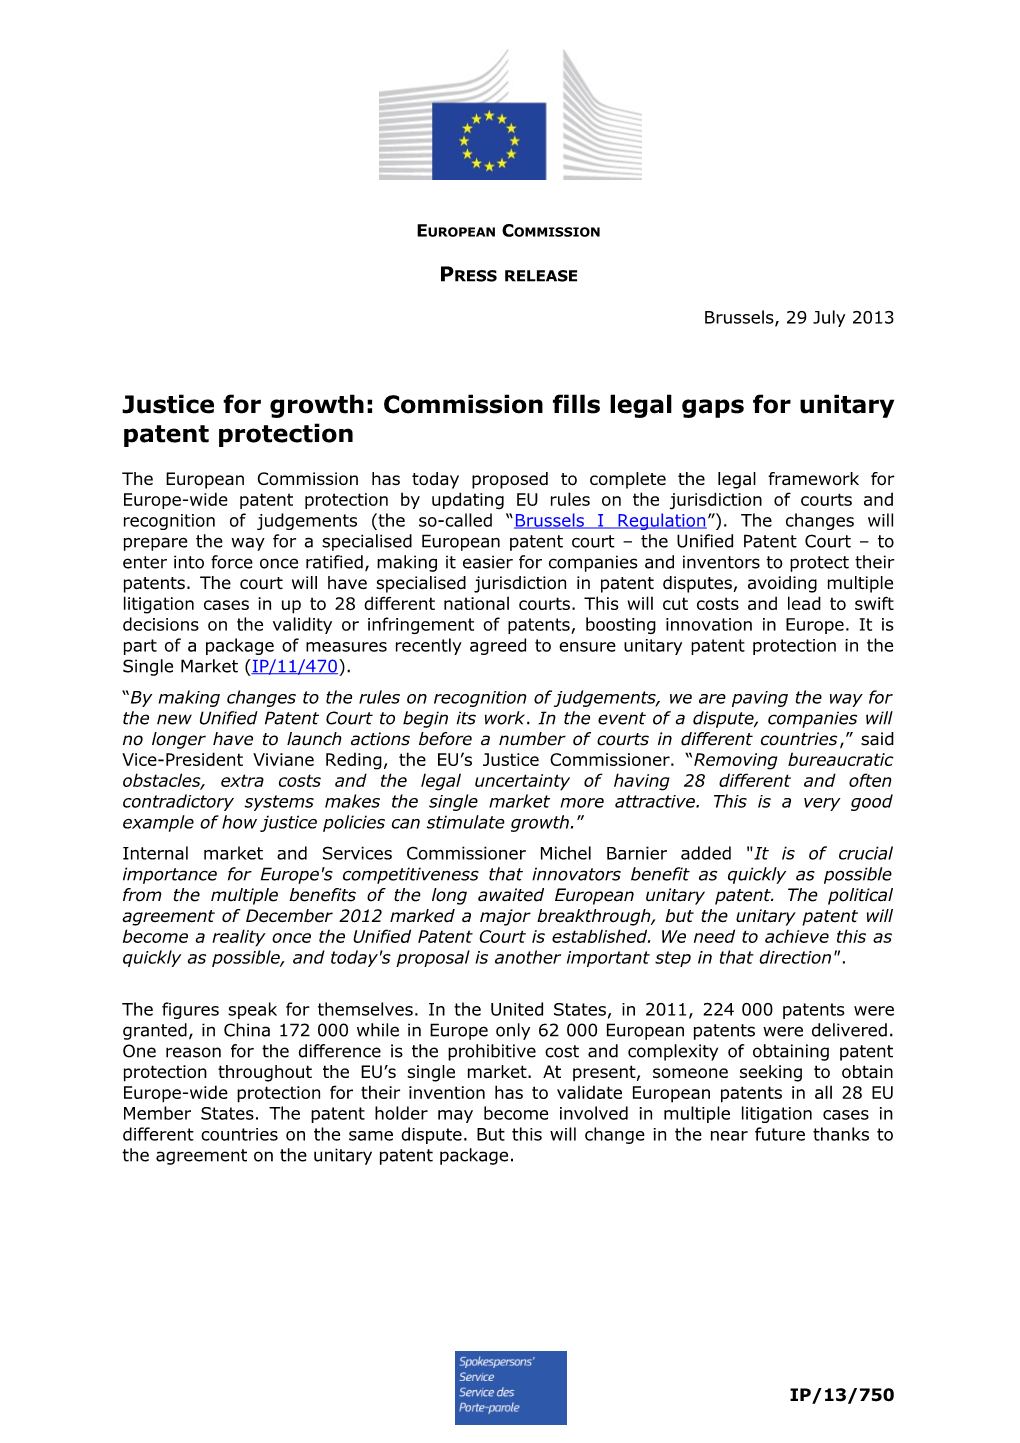 Justice for Growth: Commission Fills Legal Gaps for Unitary Patent Protection